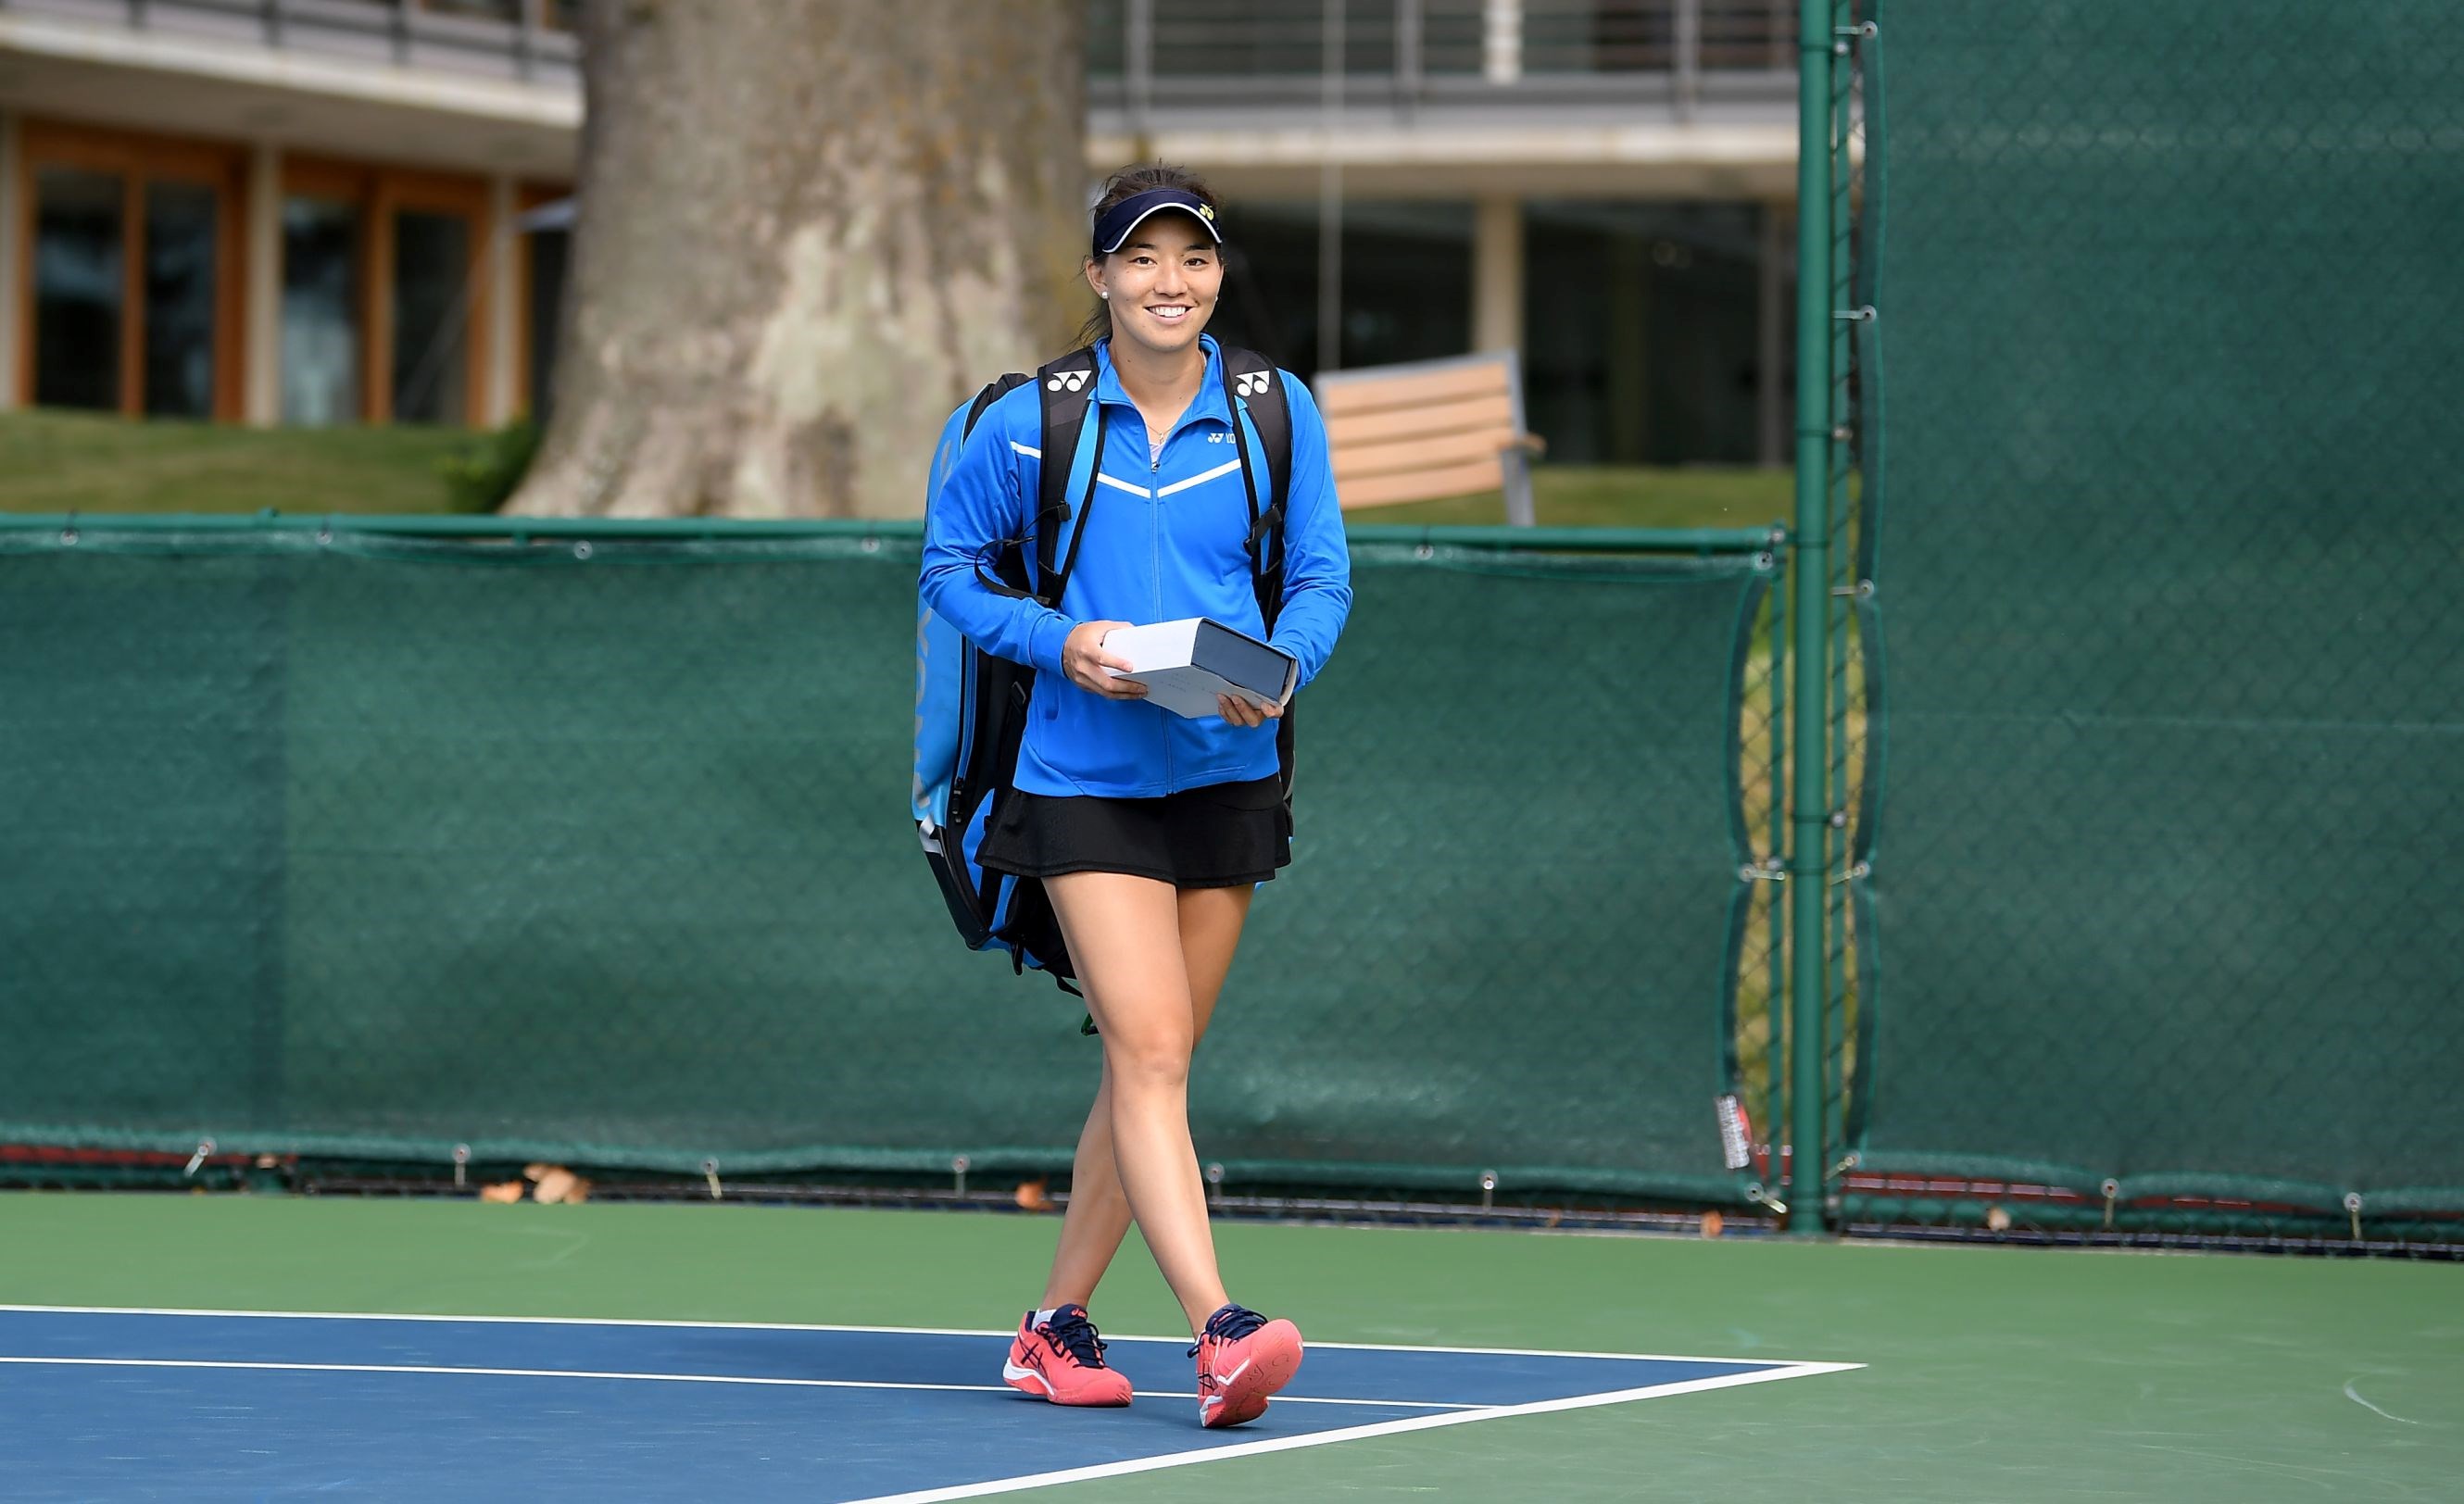 Lily Miyazaki walking on court at the British Tour tournament at the National Tennis Centre